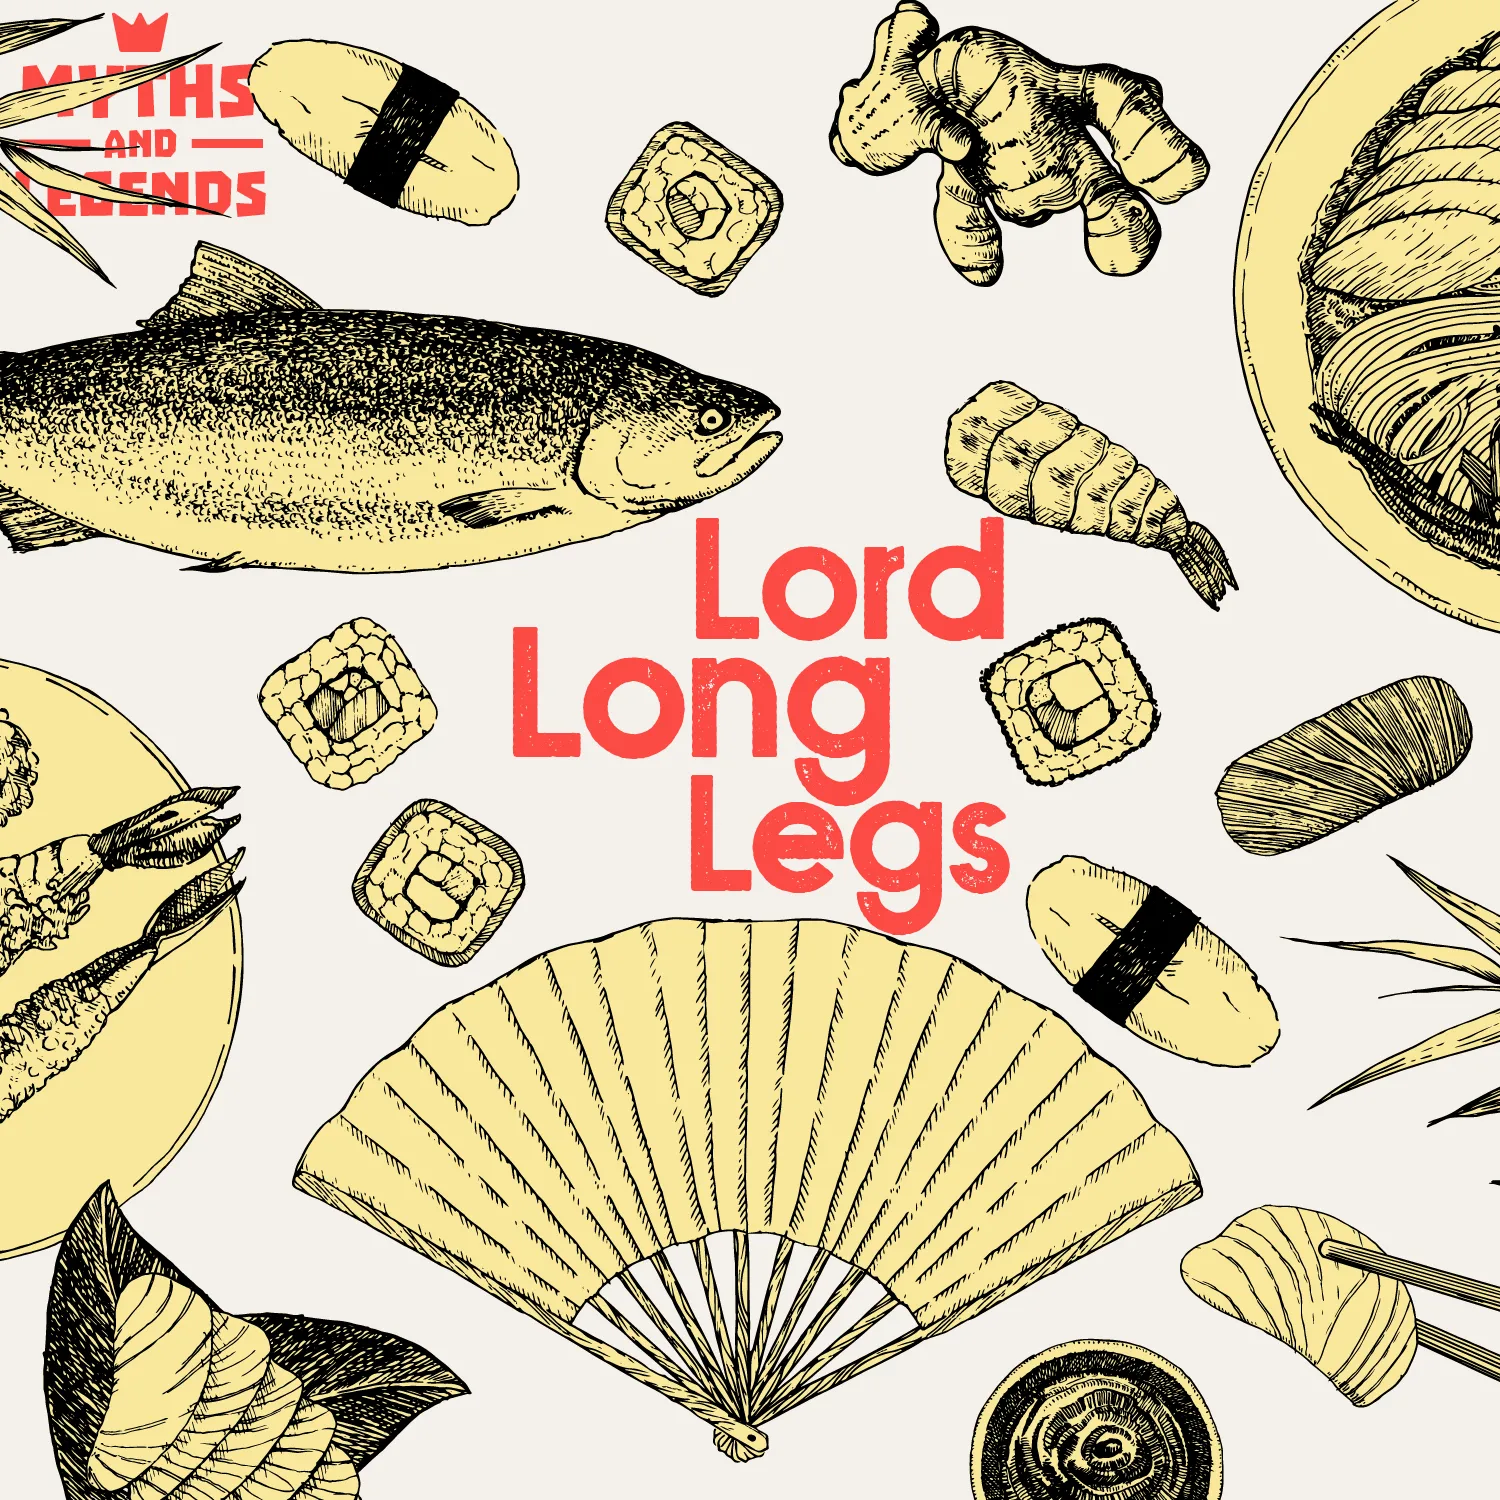 An illustration with a central theme of sushi and Japanese cuisine, entitled "Lord Long Legs". The artwork features detailed black and white drawings of various sushi pieces and a whole fish, possibly a salmon, surrounded by sushi rolls, nigiri, and sashimi on plates. Additionally, there is a Japanese folding fan towards the bottom. The title "Lord Long Legs" is written in bold, red letters over the image. The background is cream-colored, allowing the food illustrations to stand out.